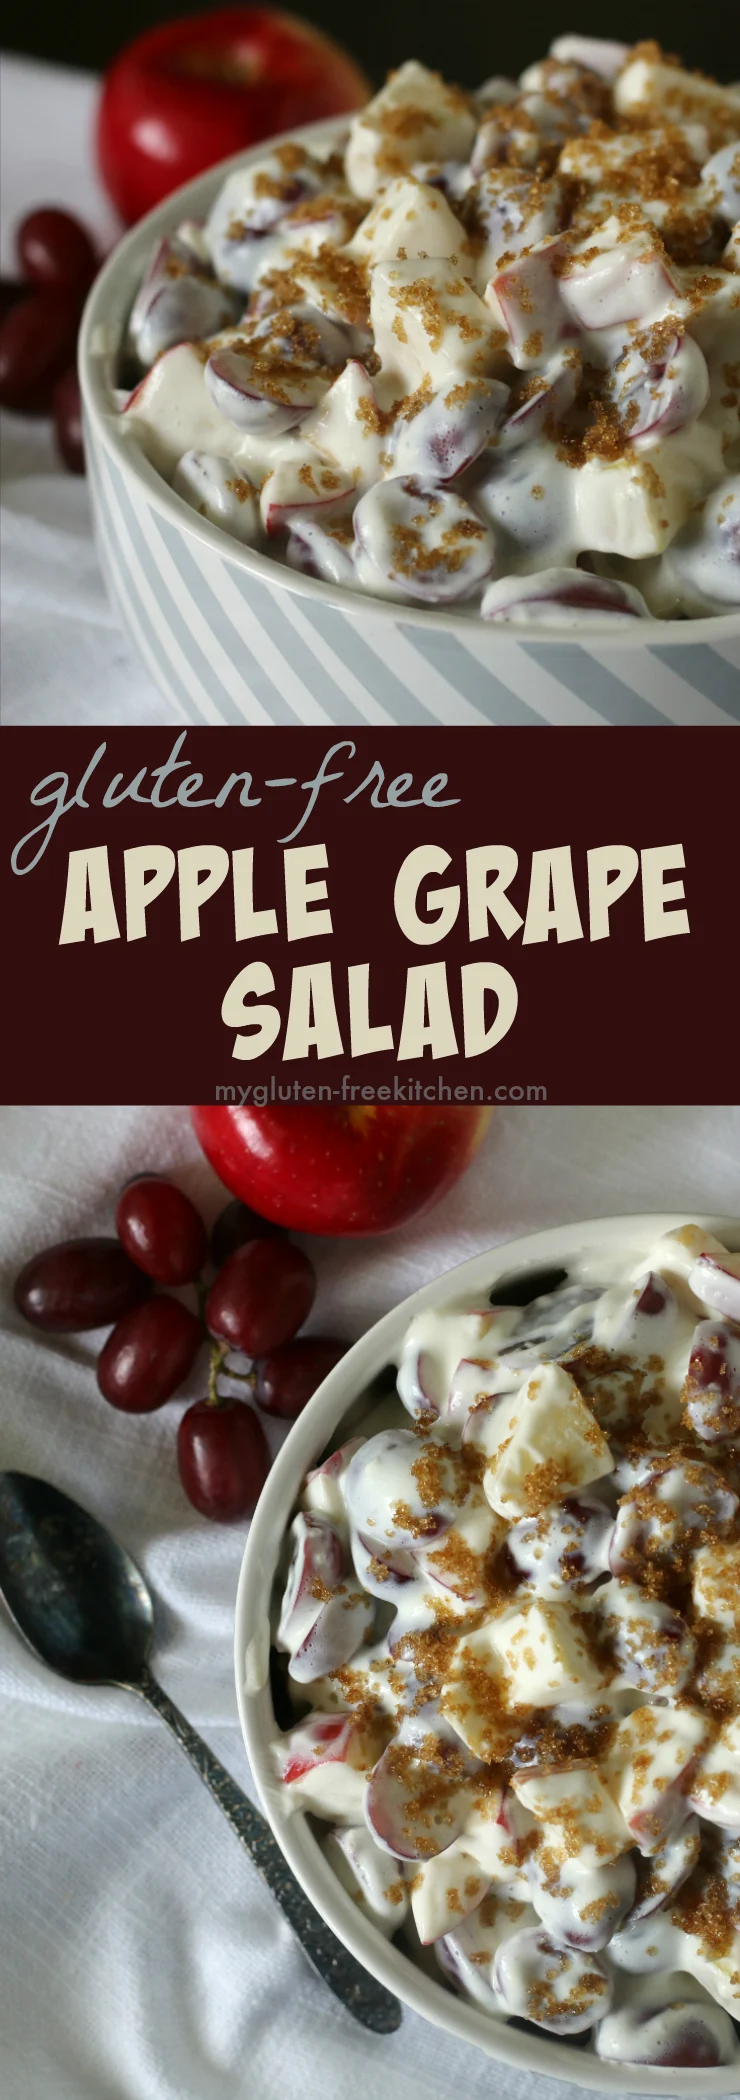 Apple Grape Salad naturally gluten-free recipe. Favorite side dish throughout the year!